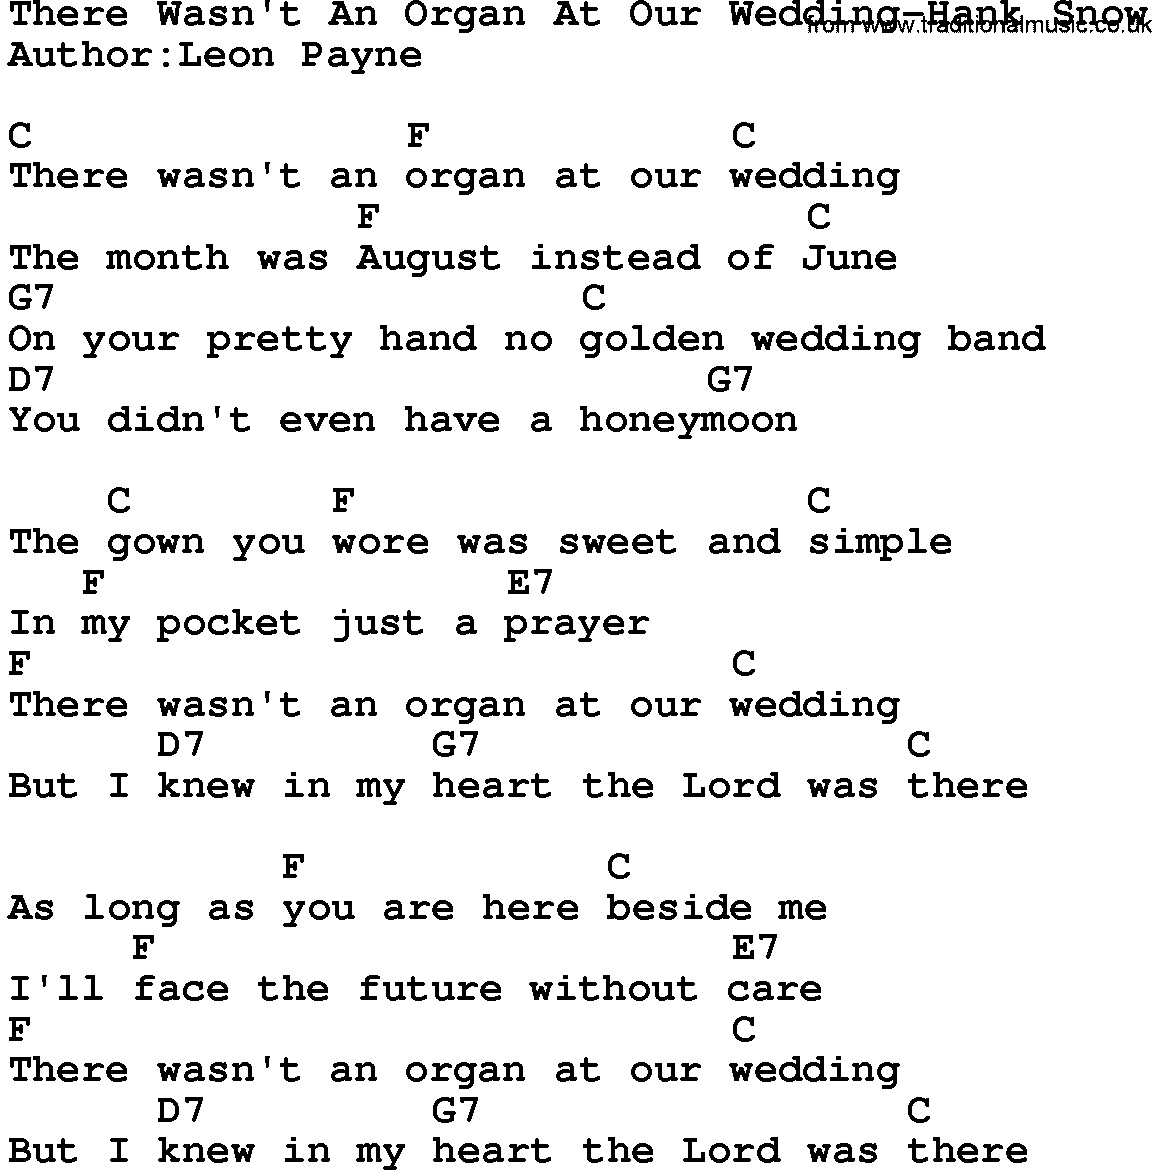 Country music song: There Wasn't An Organ At Our Wedding-Hank Snow lyrics and chords